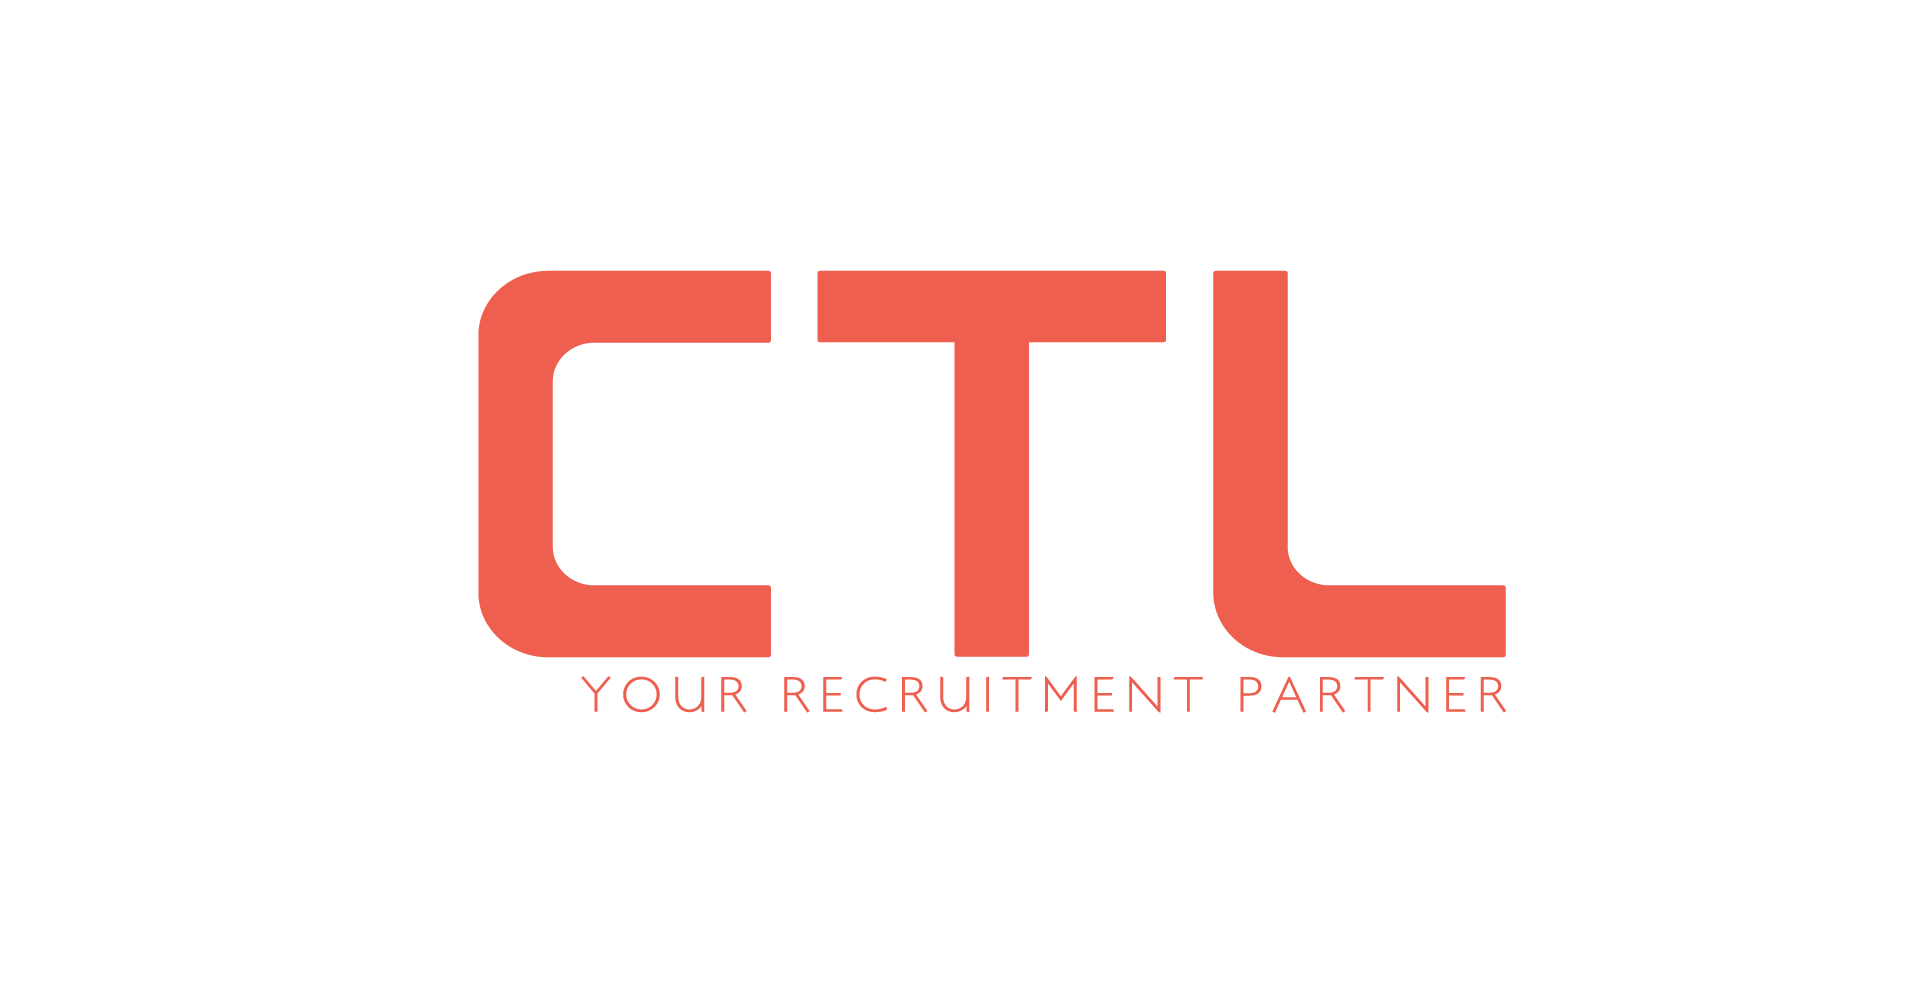 CTL Recruitment & Consultation Service Limited Logo